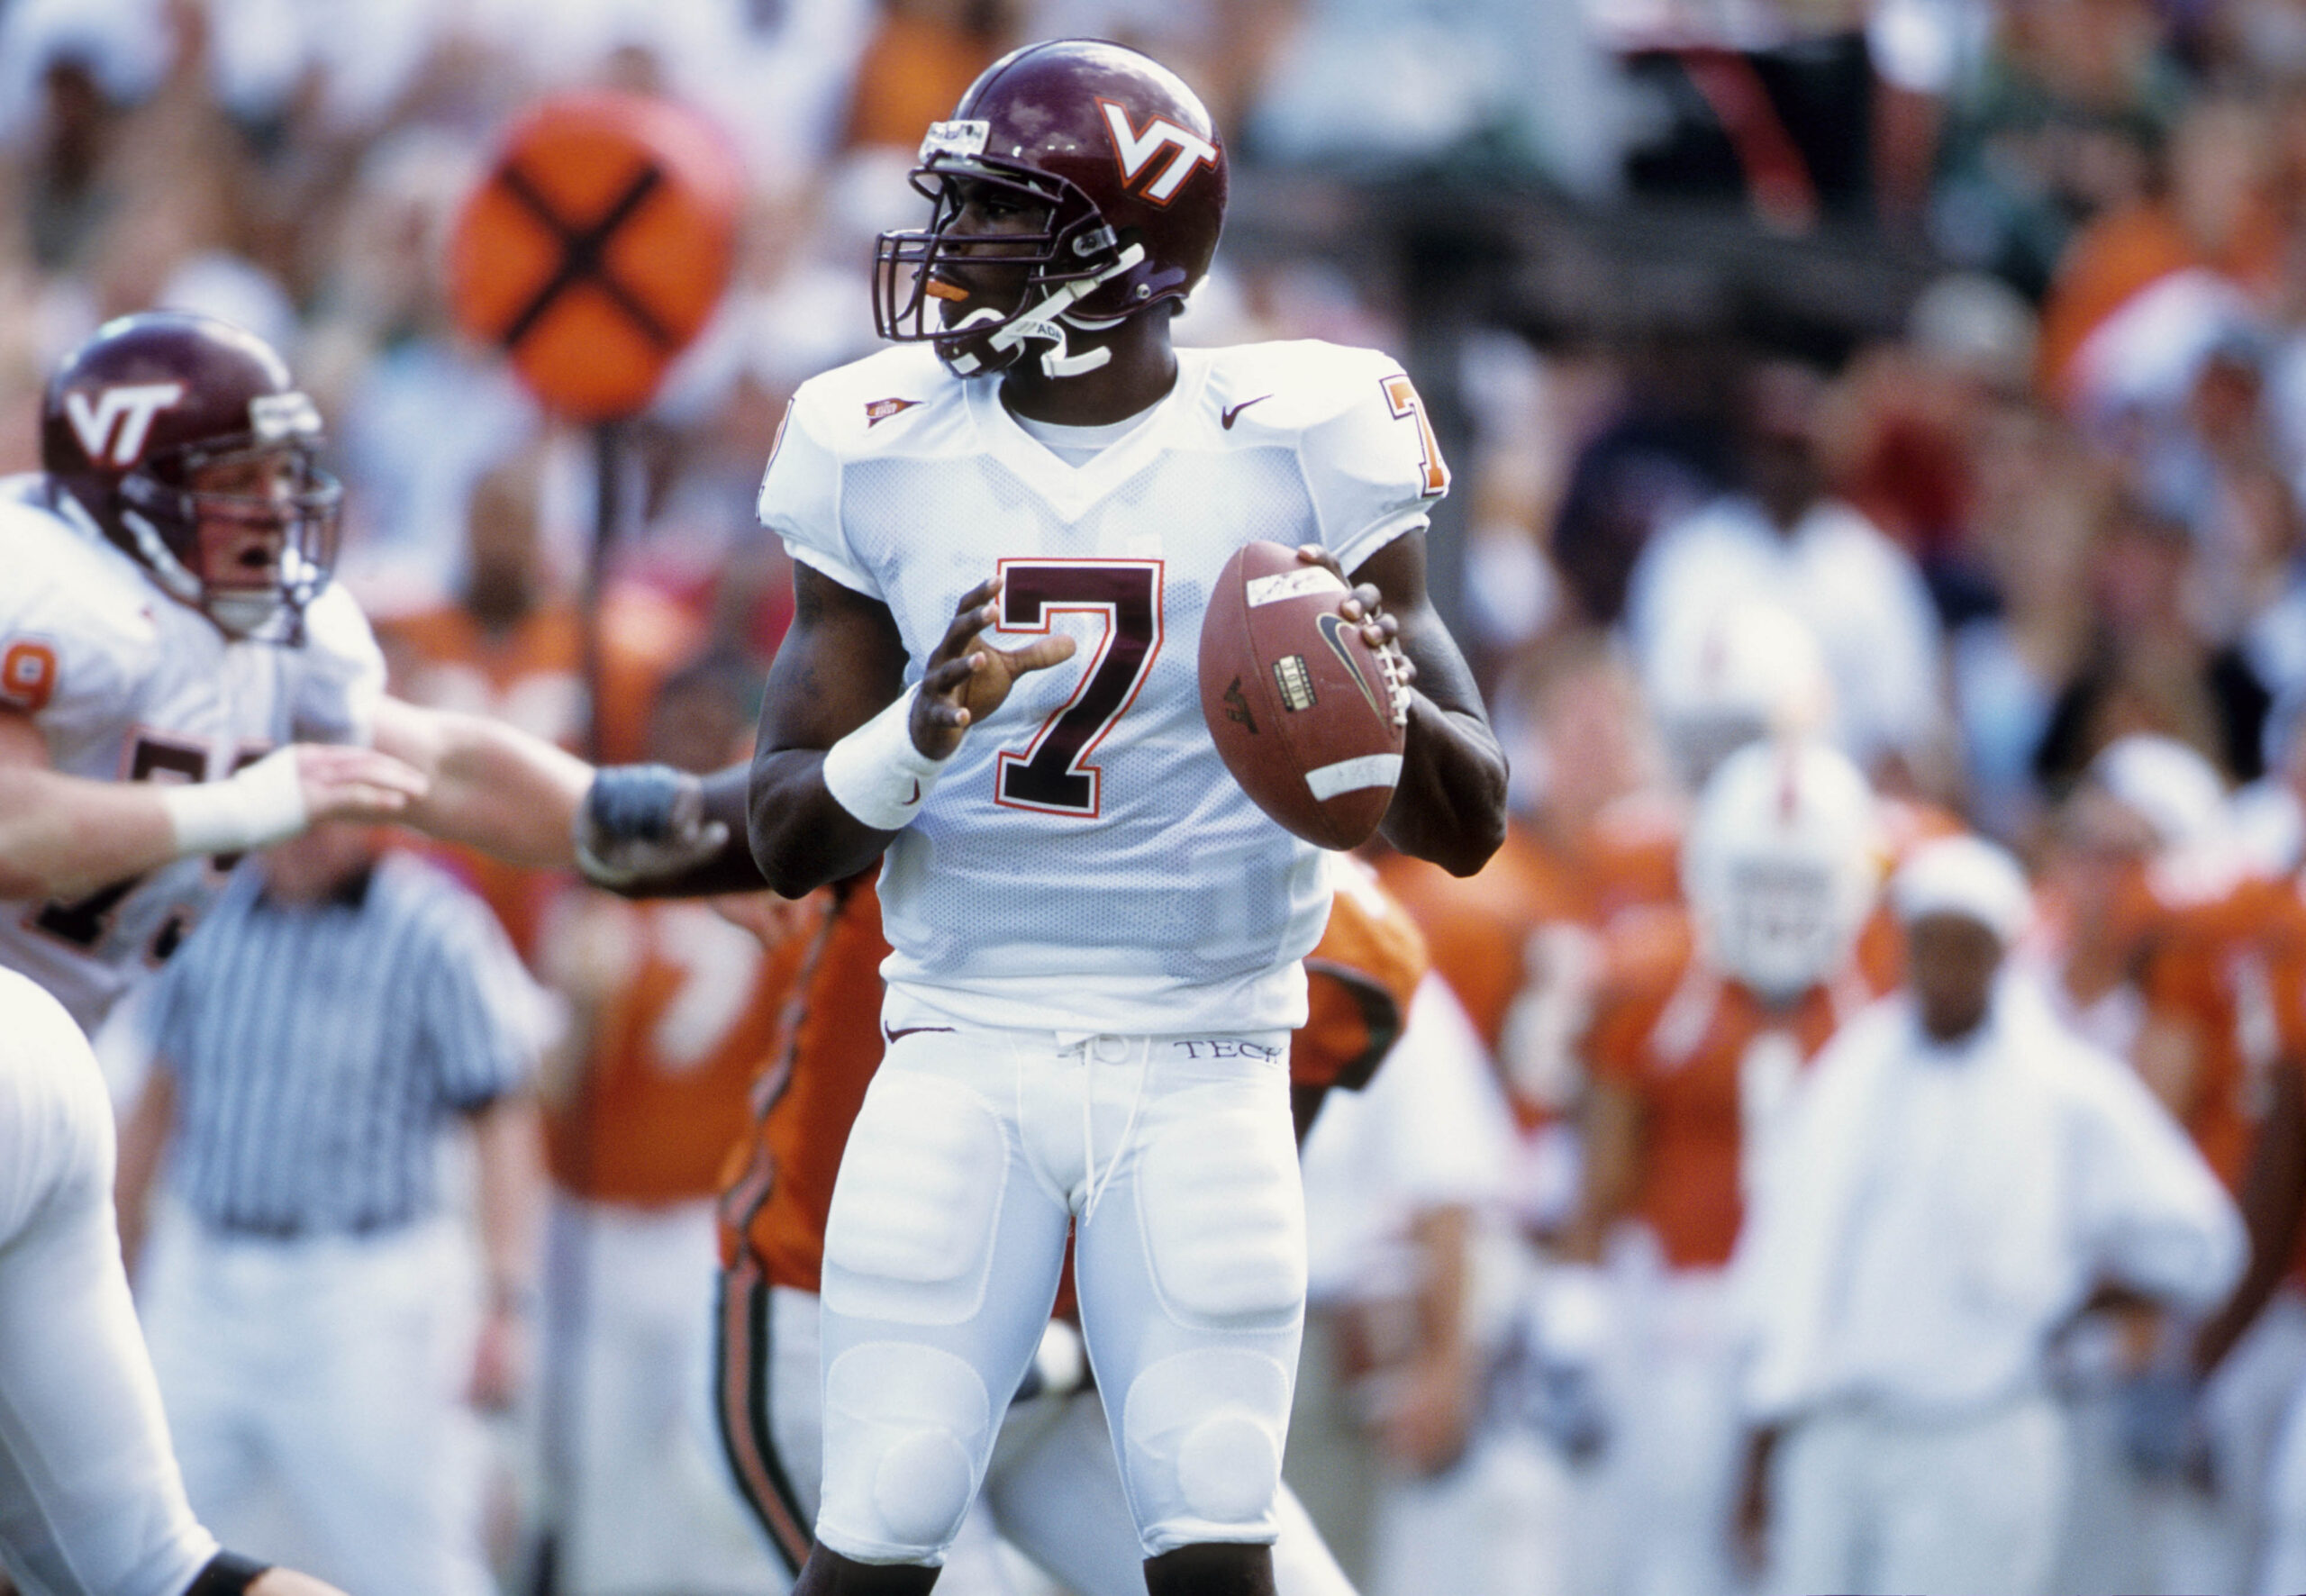 2024 College Football Hall of Fame: Michael Vick and Peter Warrick